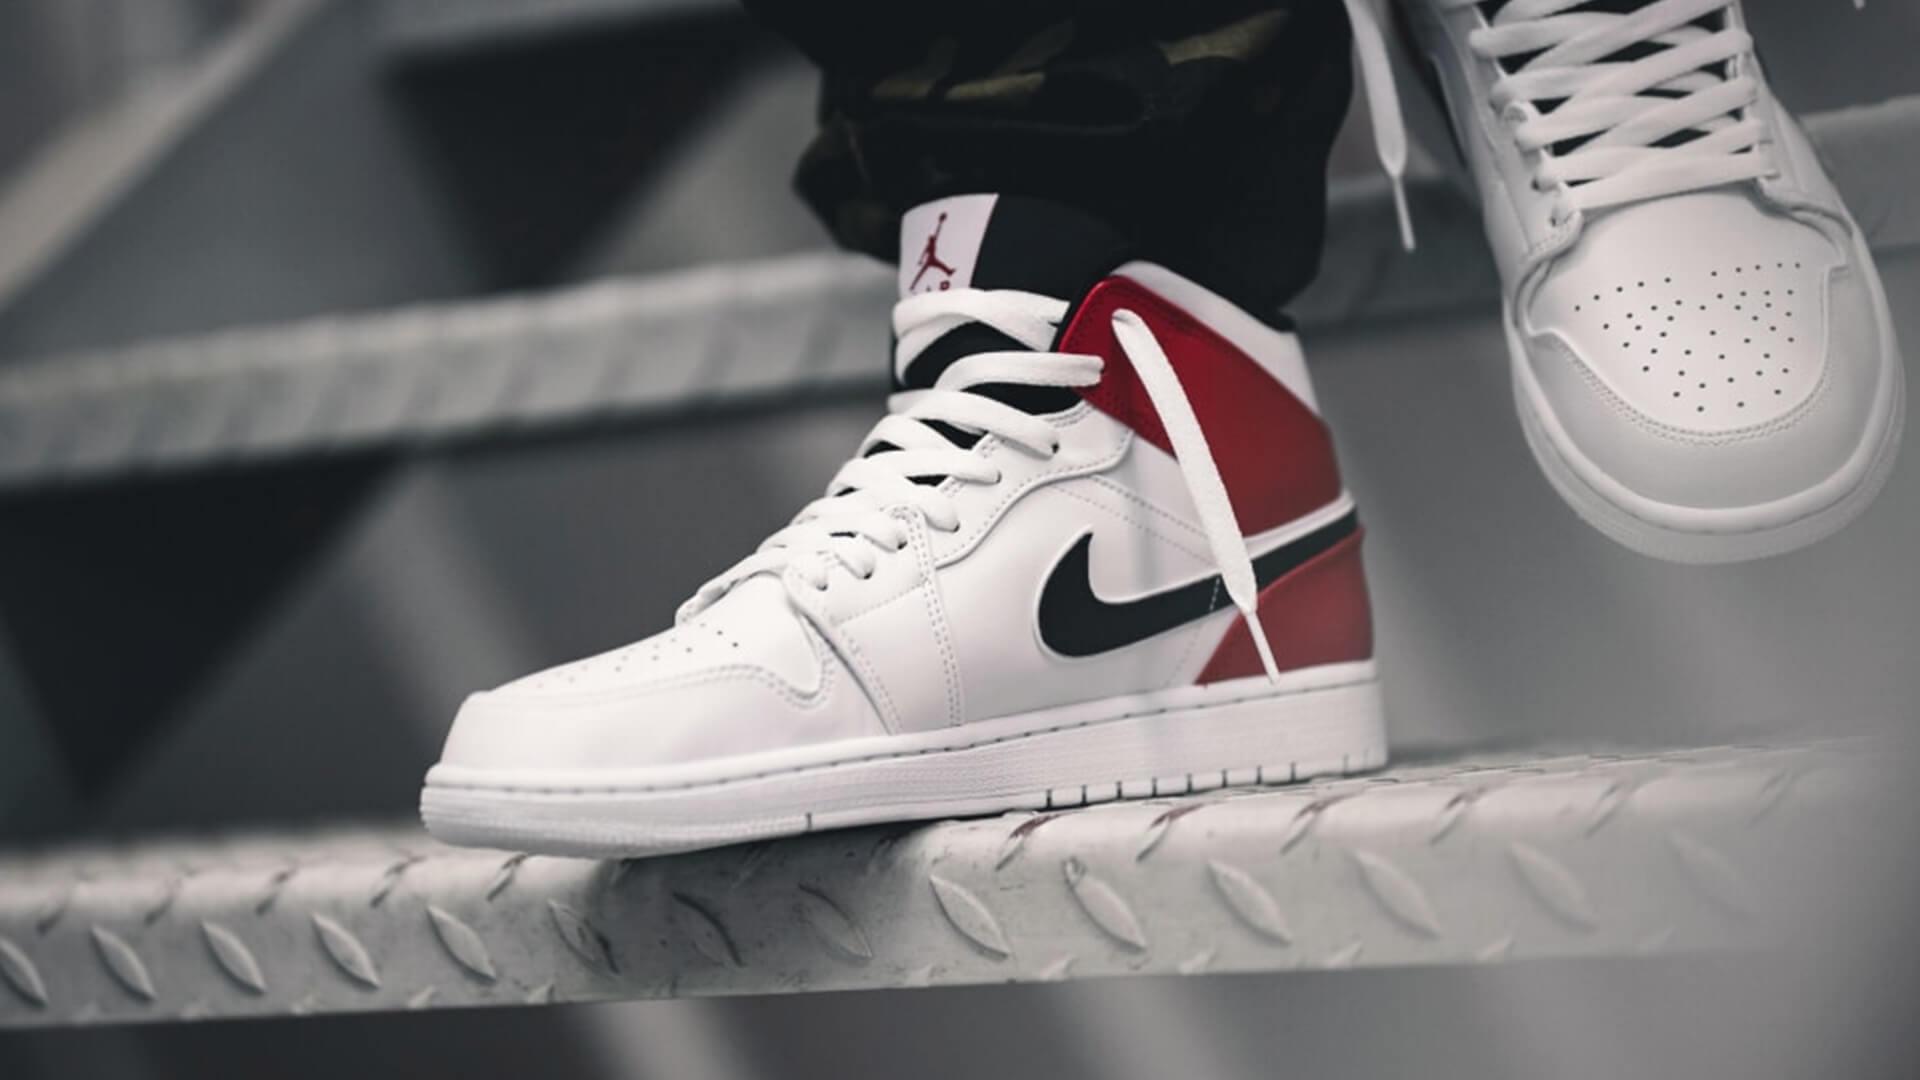 Latest Nike Air Jordan 1 Trainer Releases & Next Drops. The Sole